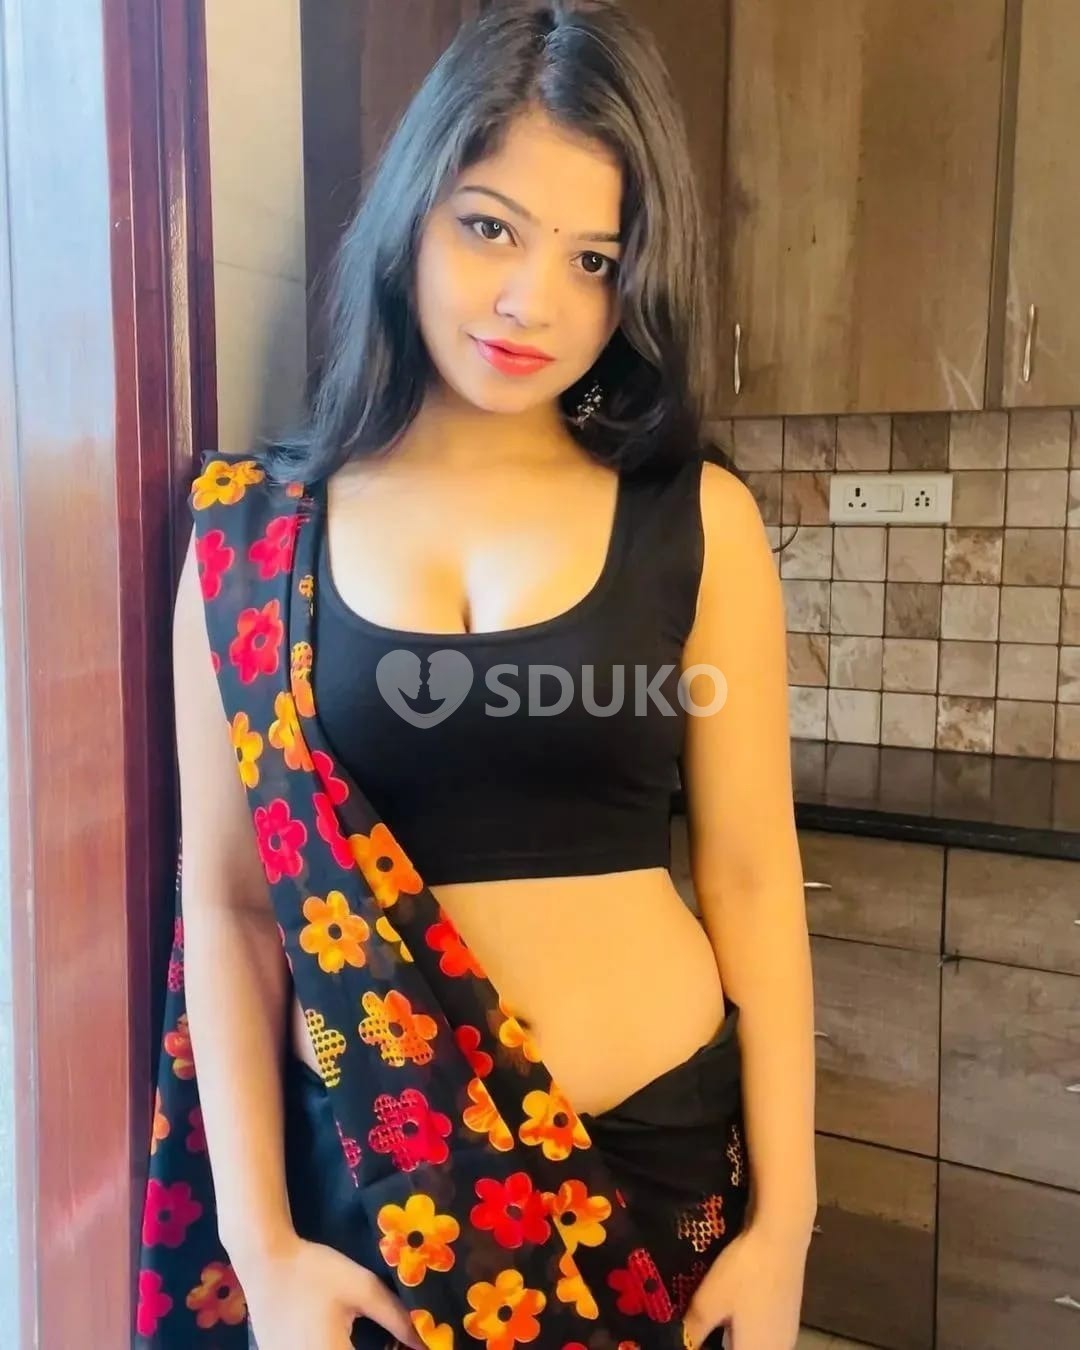 Hello Guys I am Nandini Ghatkopar low cost unlimited hard sex call girls Housewife service Available